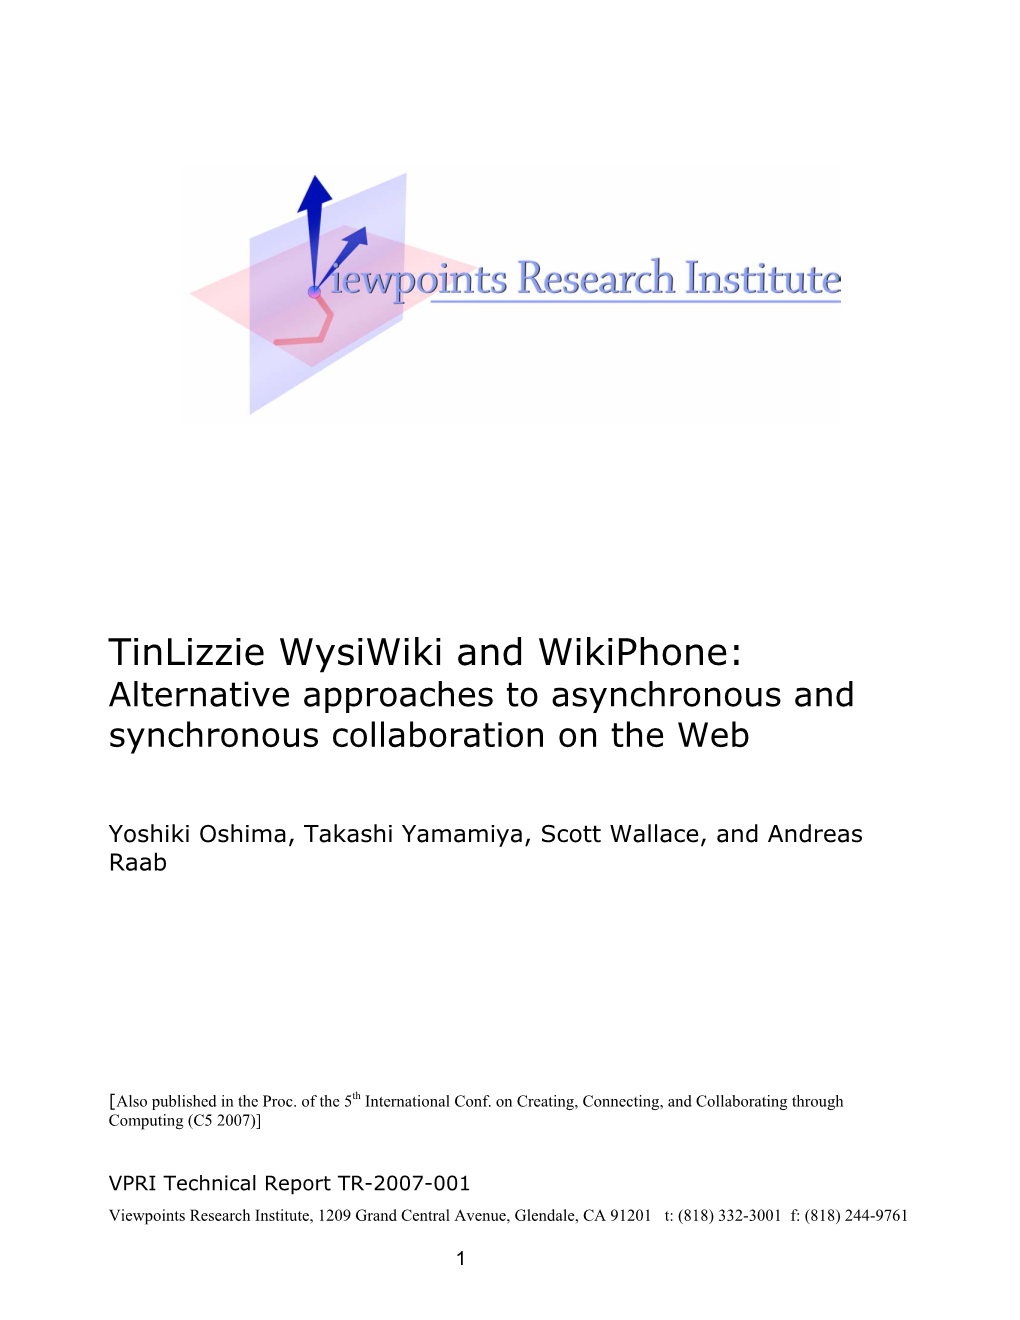 Tinlizzie Wysiwiki and Wikiphone: Alternative Approaches to Asynchronous and Synchronous Collaboration on the Web